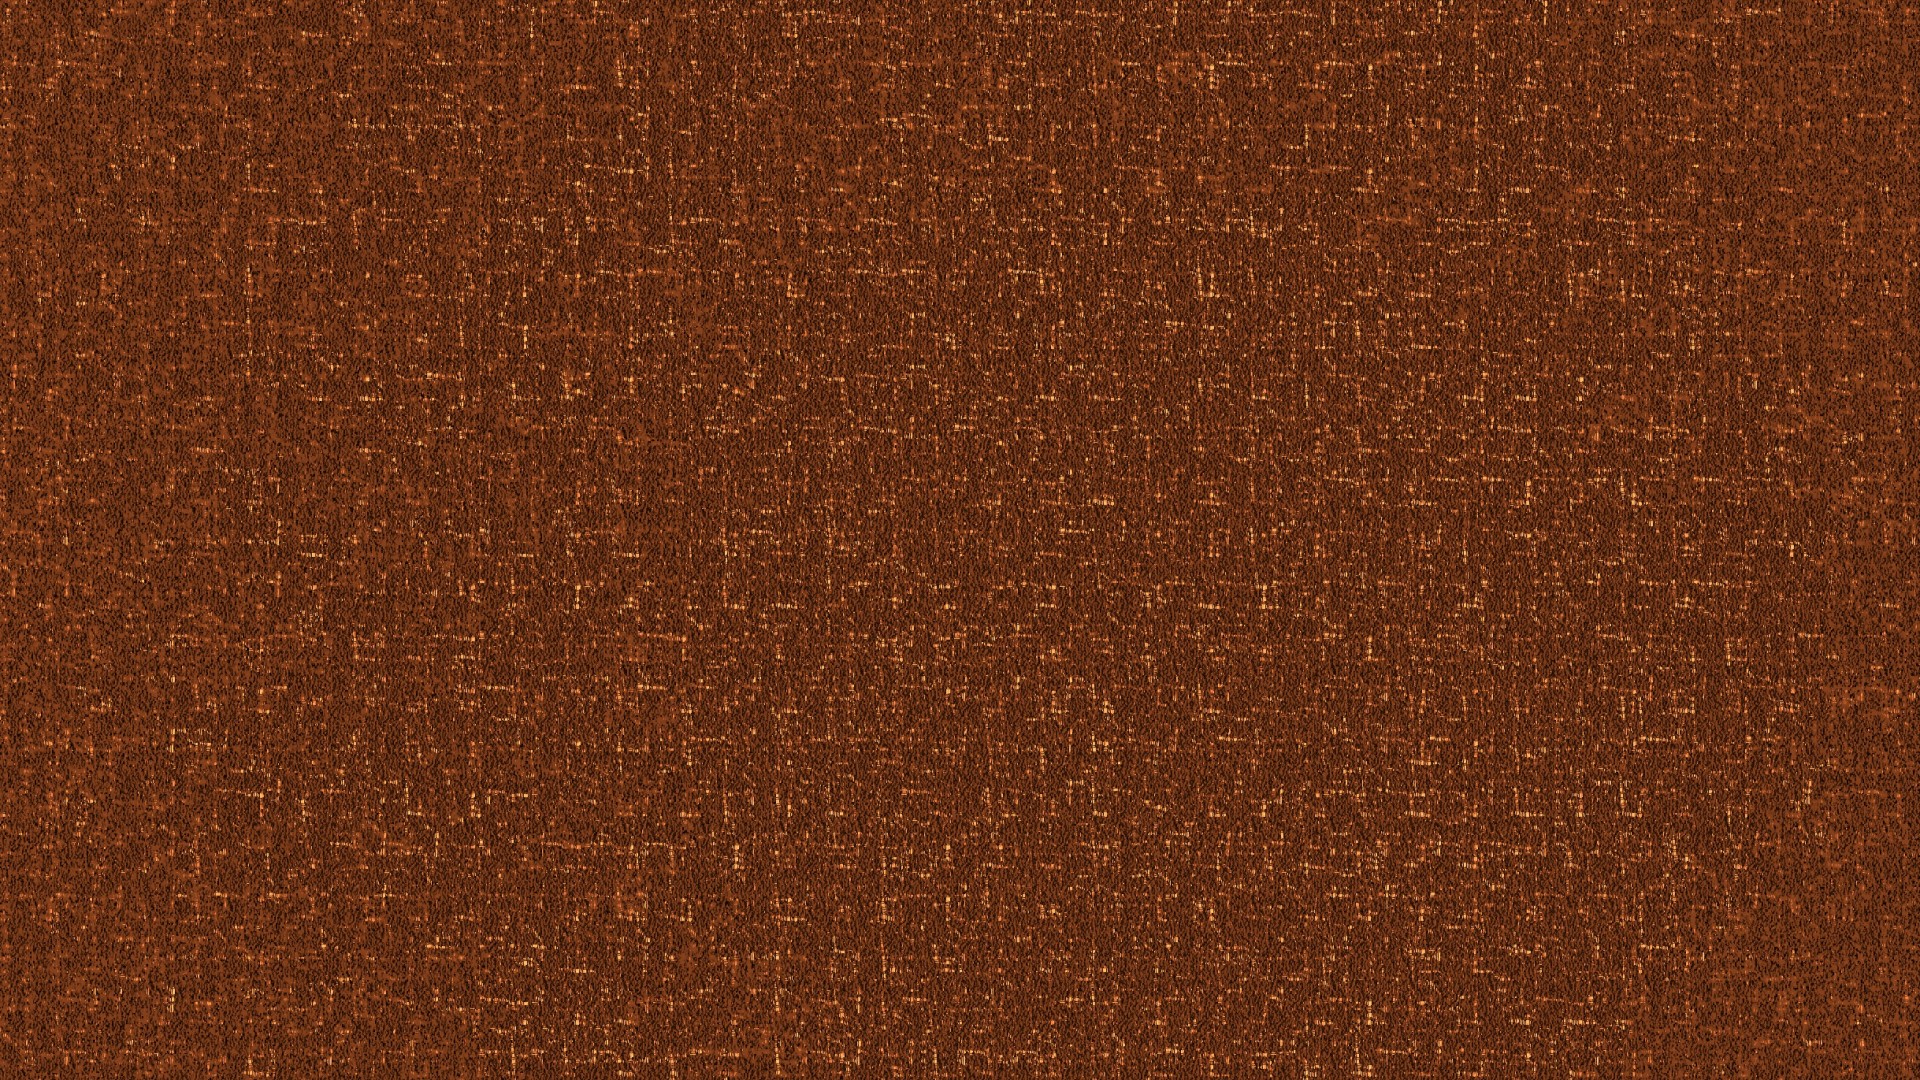 Brown Denim Background Pattern Free Stock Photo - Public Domain Pictures